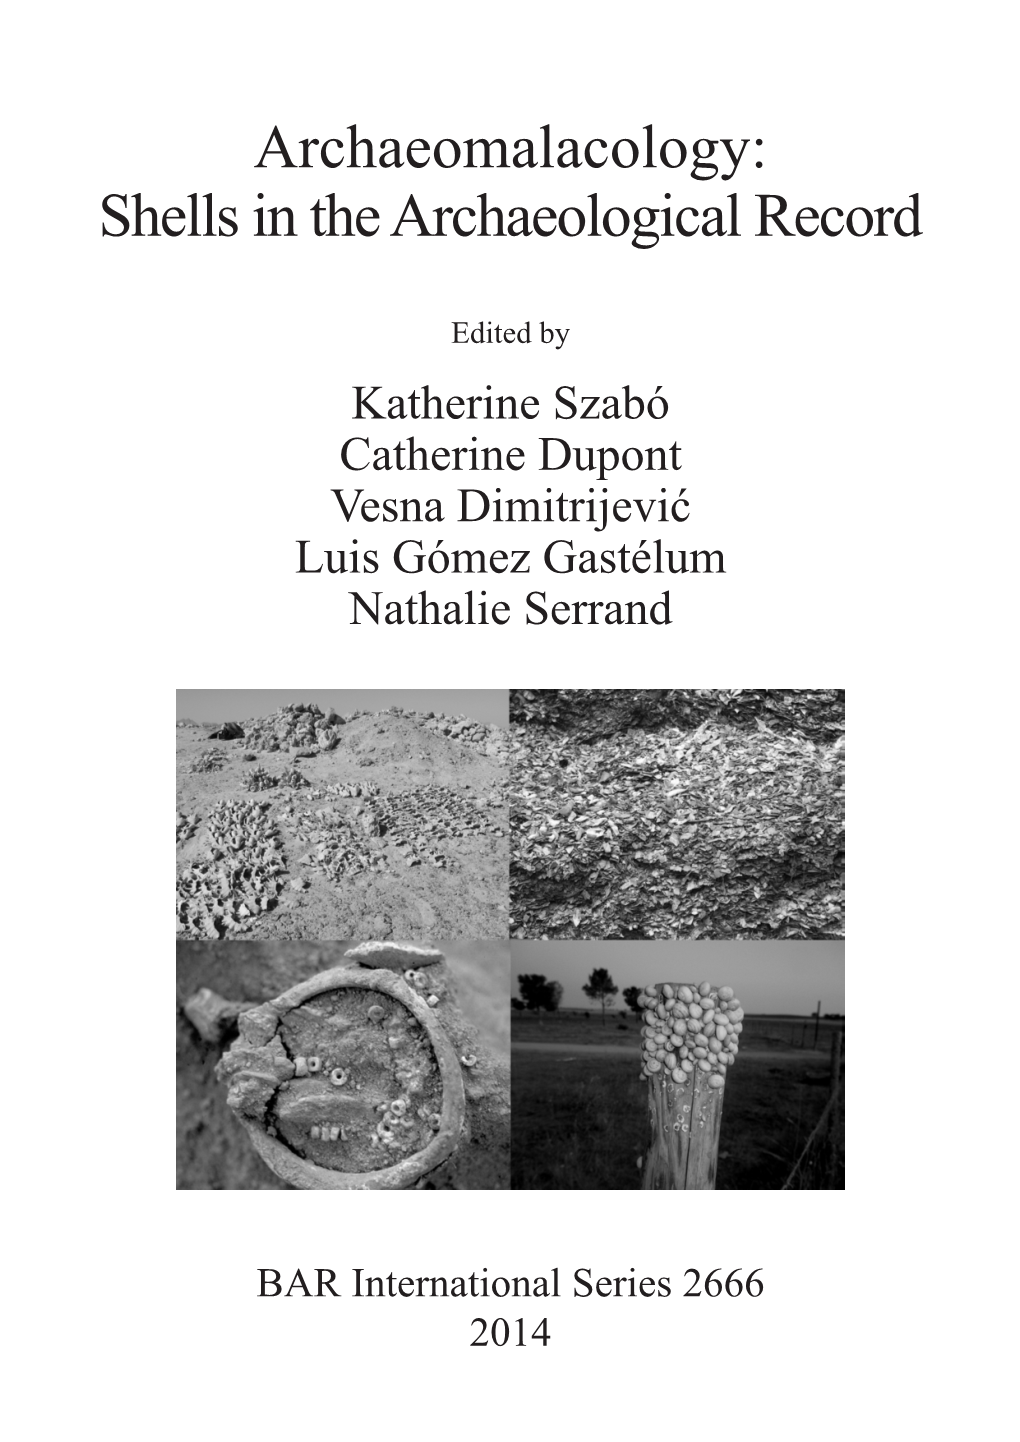 Archaeomalacology: Shells in the Archaeological Record